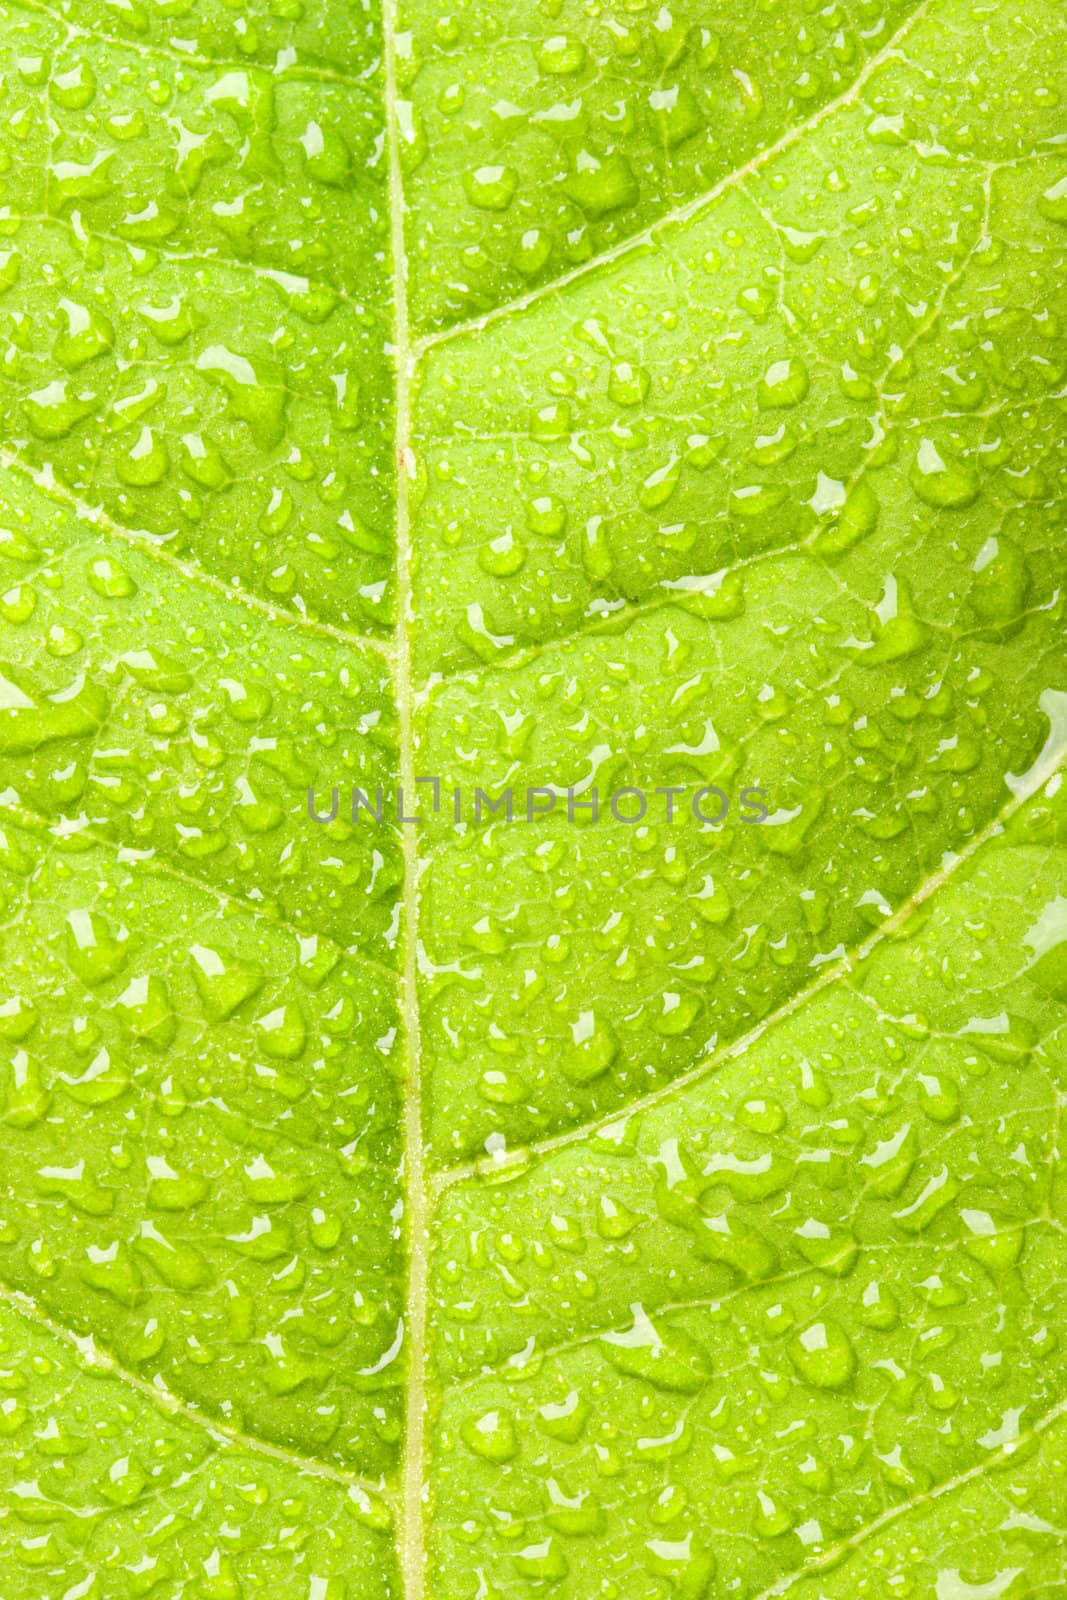 Green leaf with water droplets by dimol